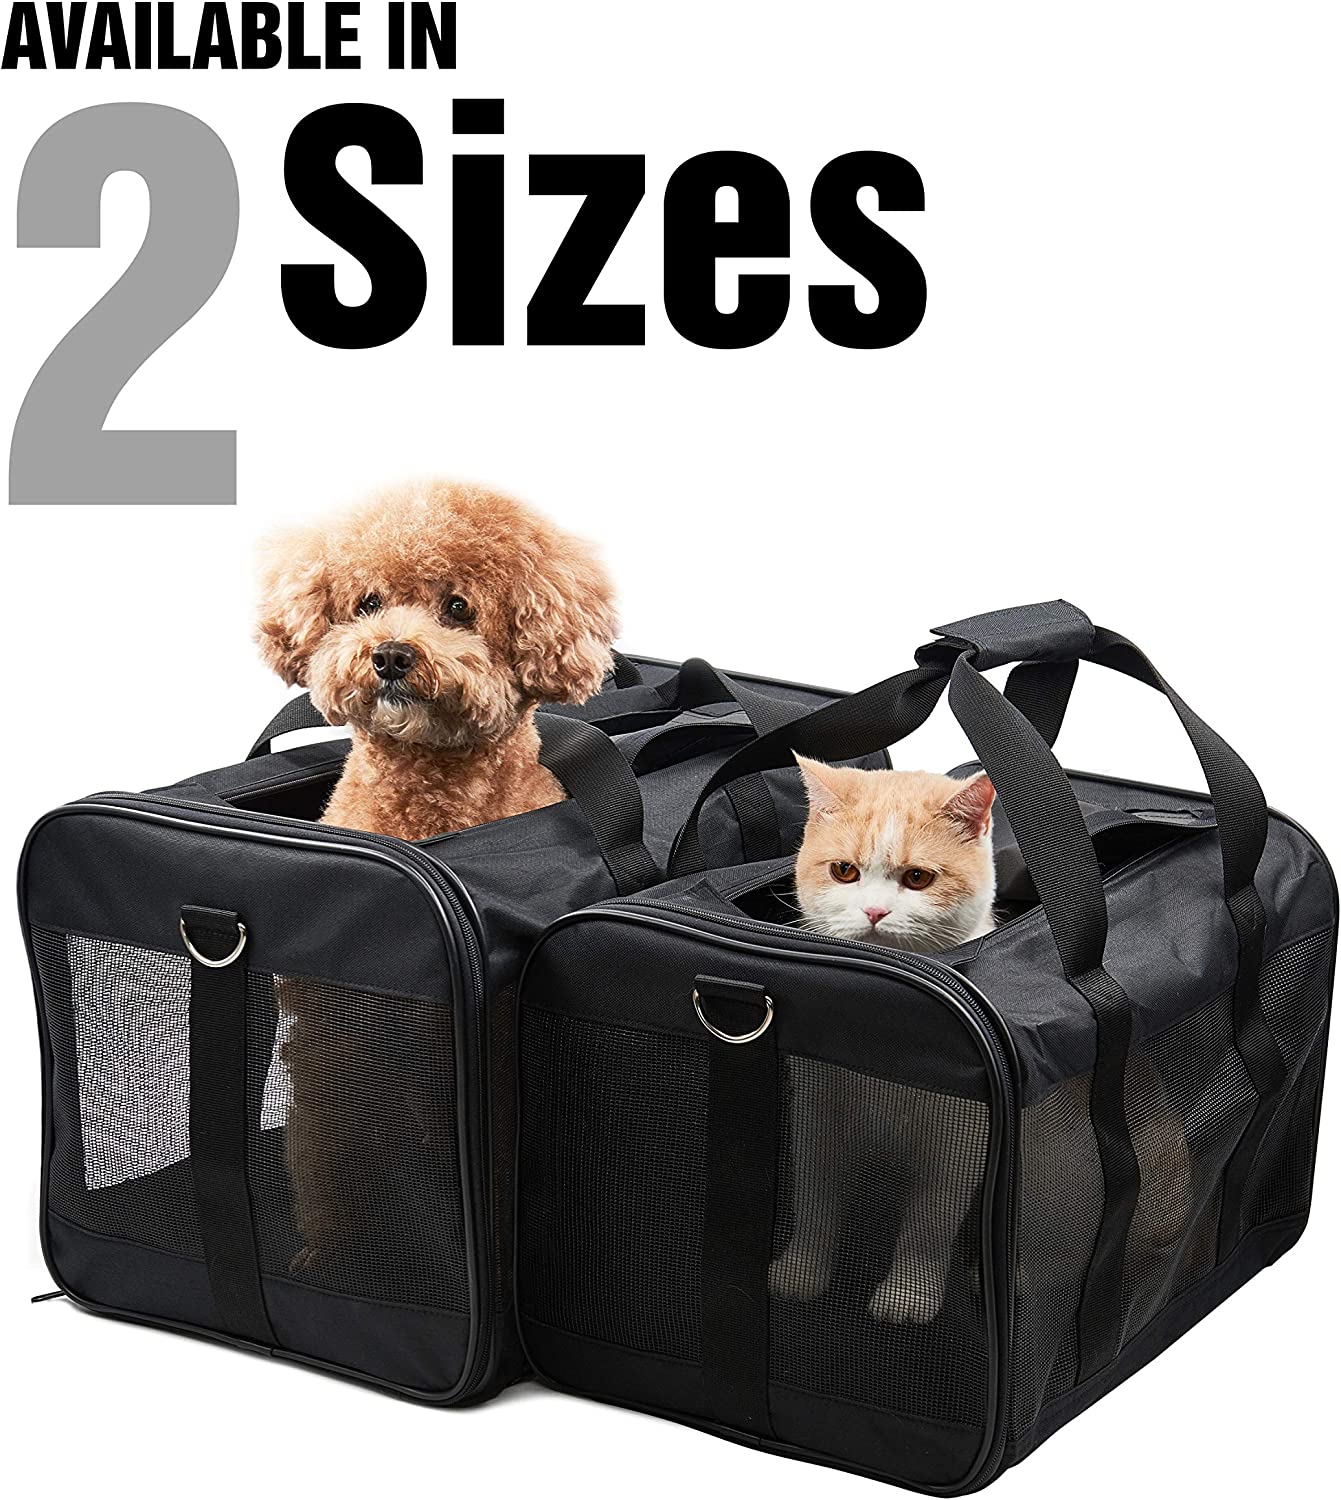 Puppy Bags in Mundri Mohalla,Ajmer - Best Bag Dealers in Ajmer - Justdial